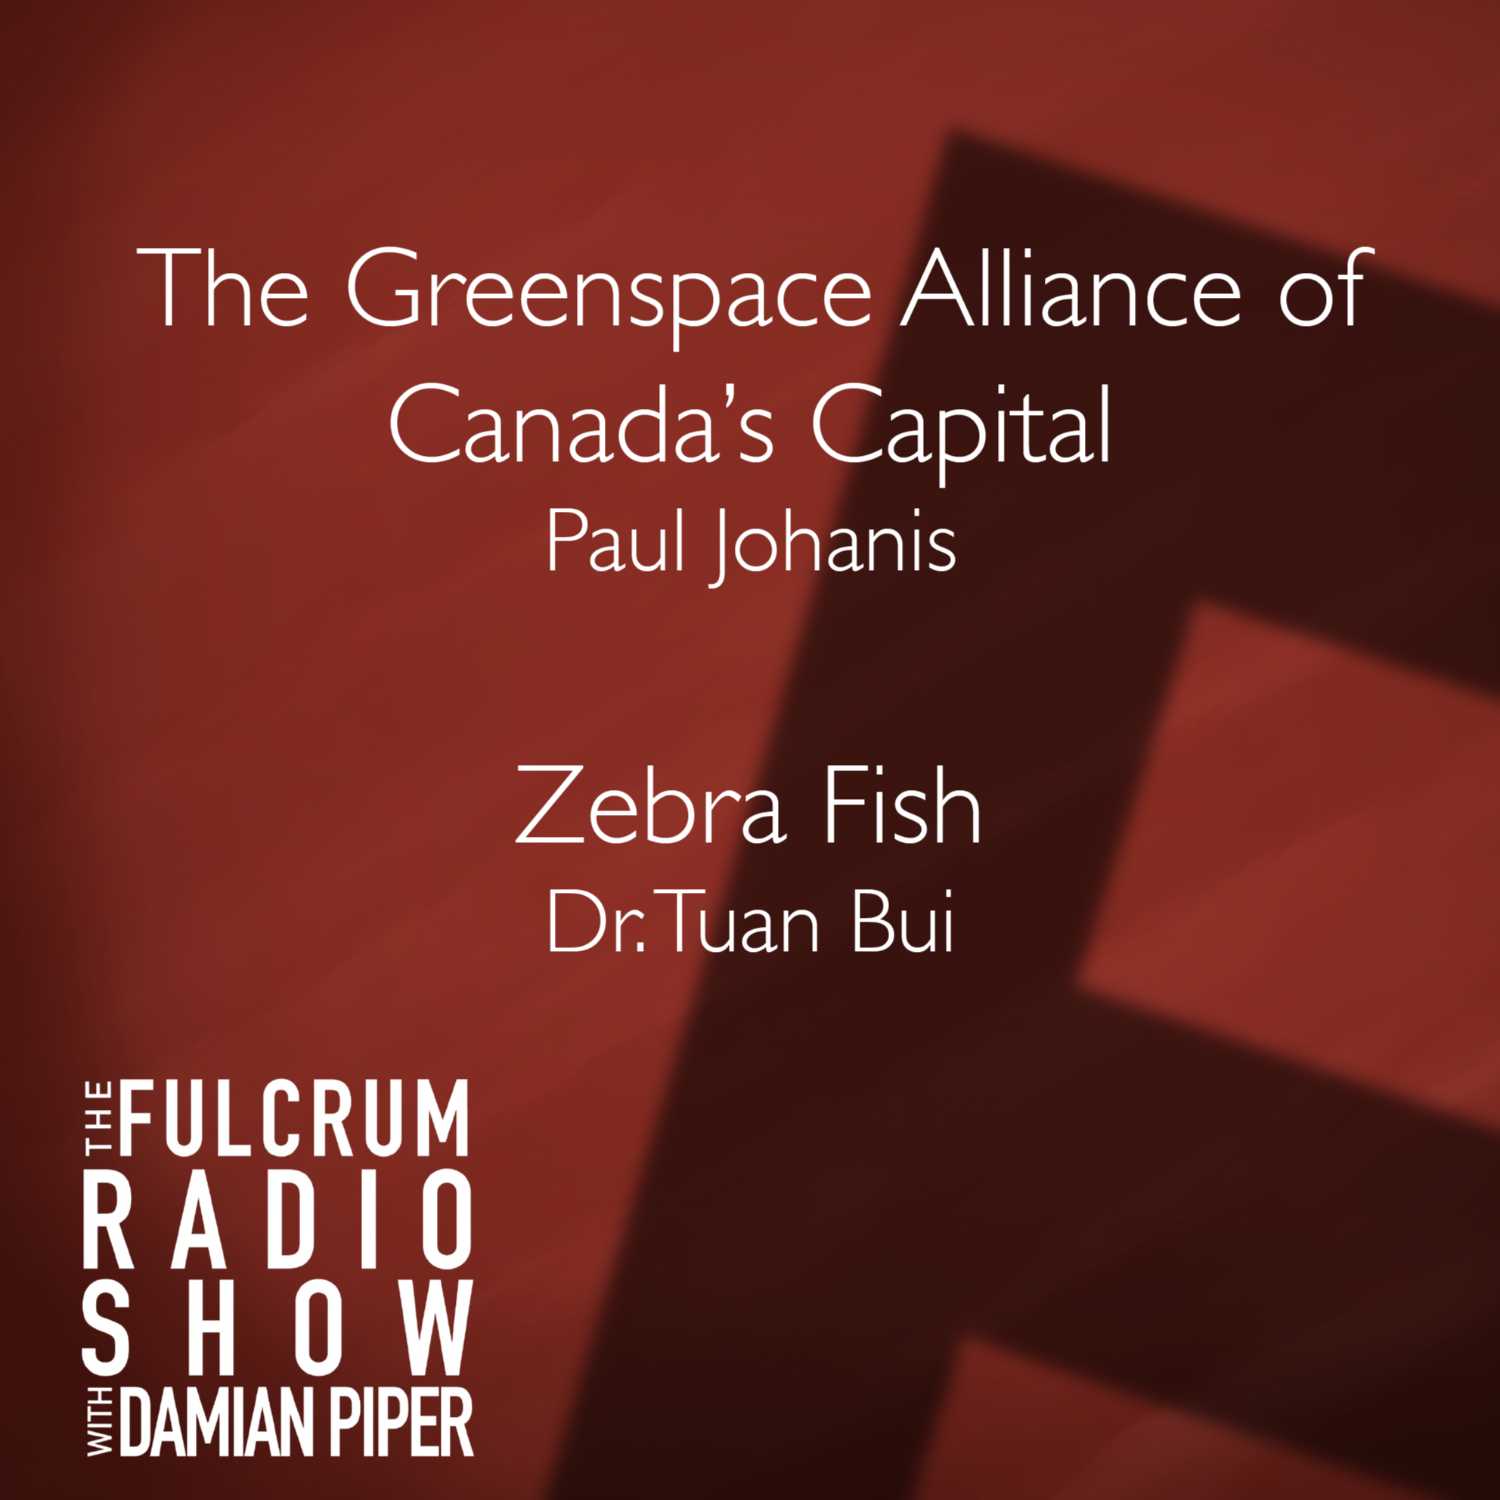 Episode 8: The Greenspace Alliance of Canada's Capital, Paul Johanis; and Dr. Tuan Bui on Zebra Fish